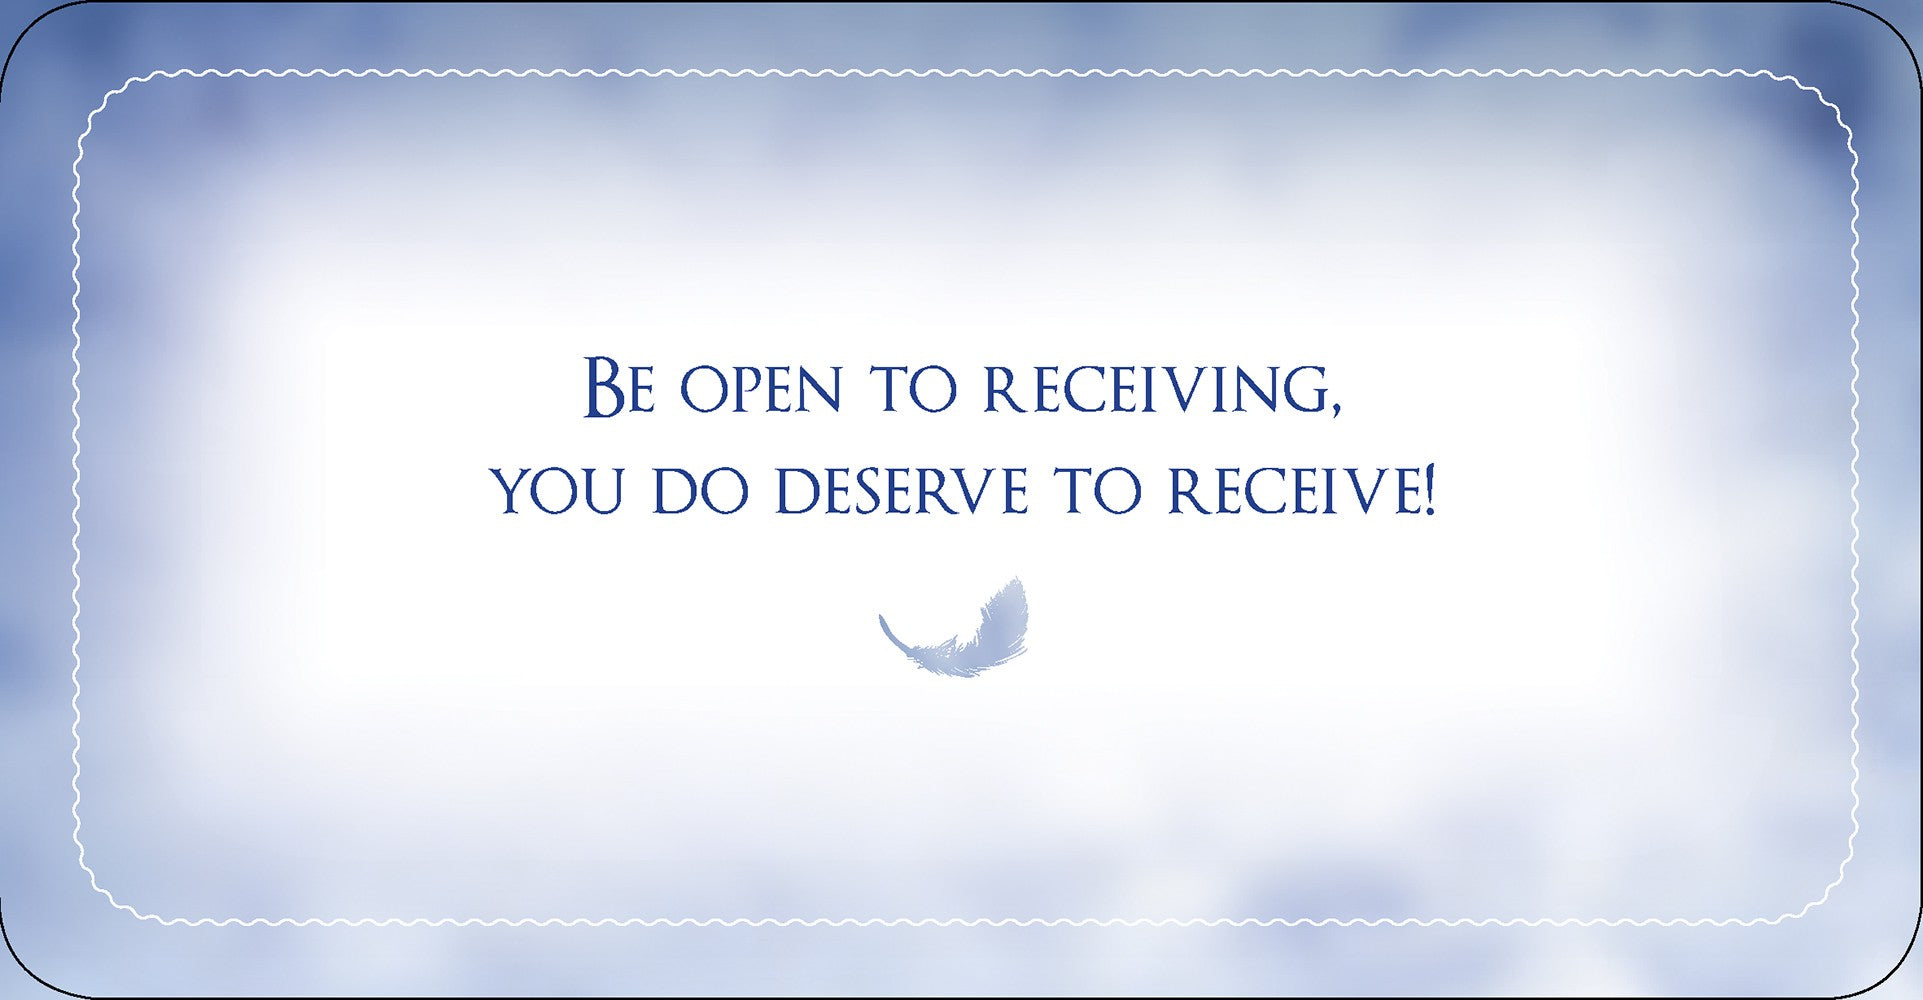 be open to receiving card